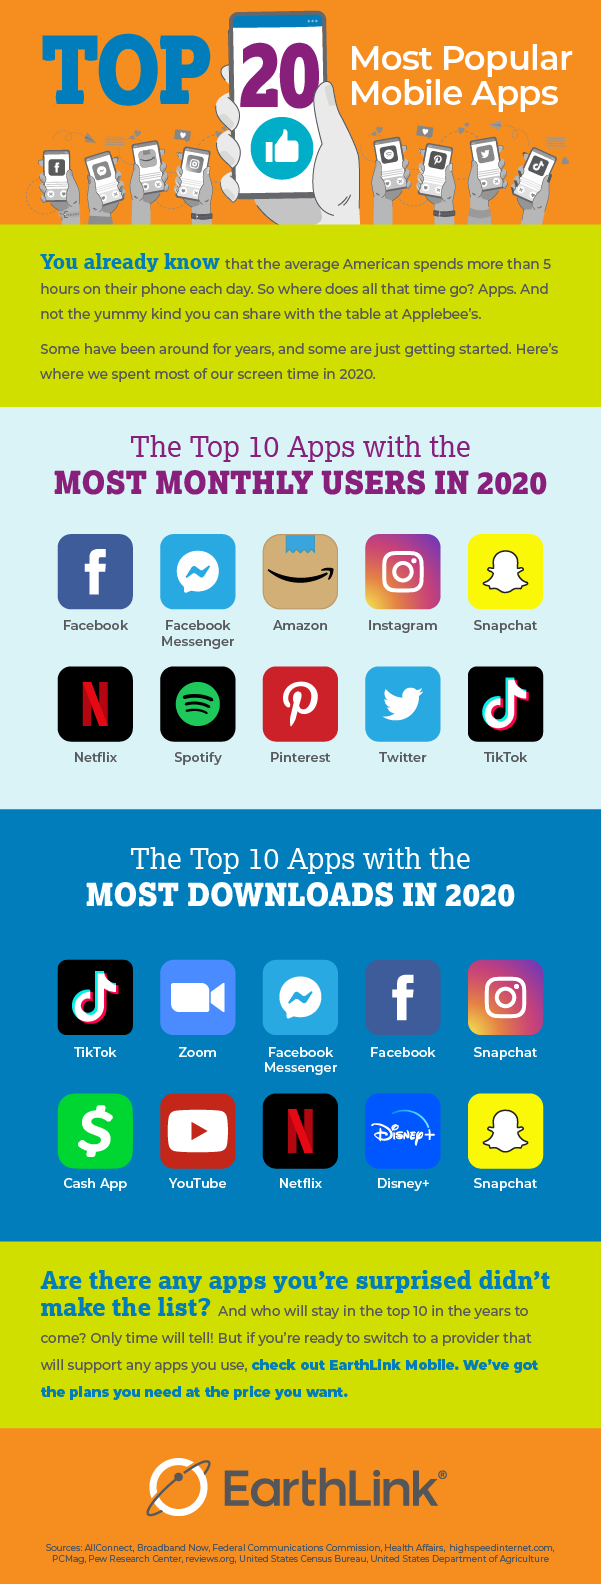 An infographic detailing the top 10 most used apps in 2020: Facebook, Facebook messenger, Amazon, Instagram, Snapchat, Netflix, Spotify, Pinterest, Twitter, and TikTok. The top 10 apps with the most downloads in 2020 were: TikTok, Zoom, Facebook Messenger, Facebook, Instagram, Cash App, YouTube, Netflix, Disney+, and Snapchat.